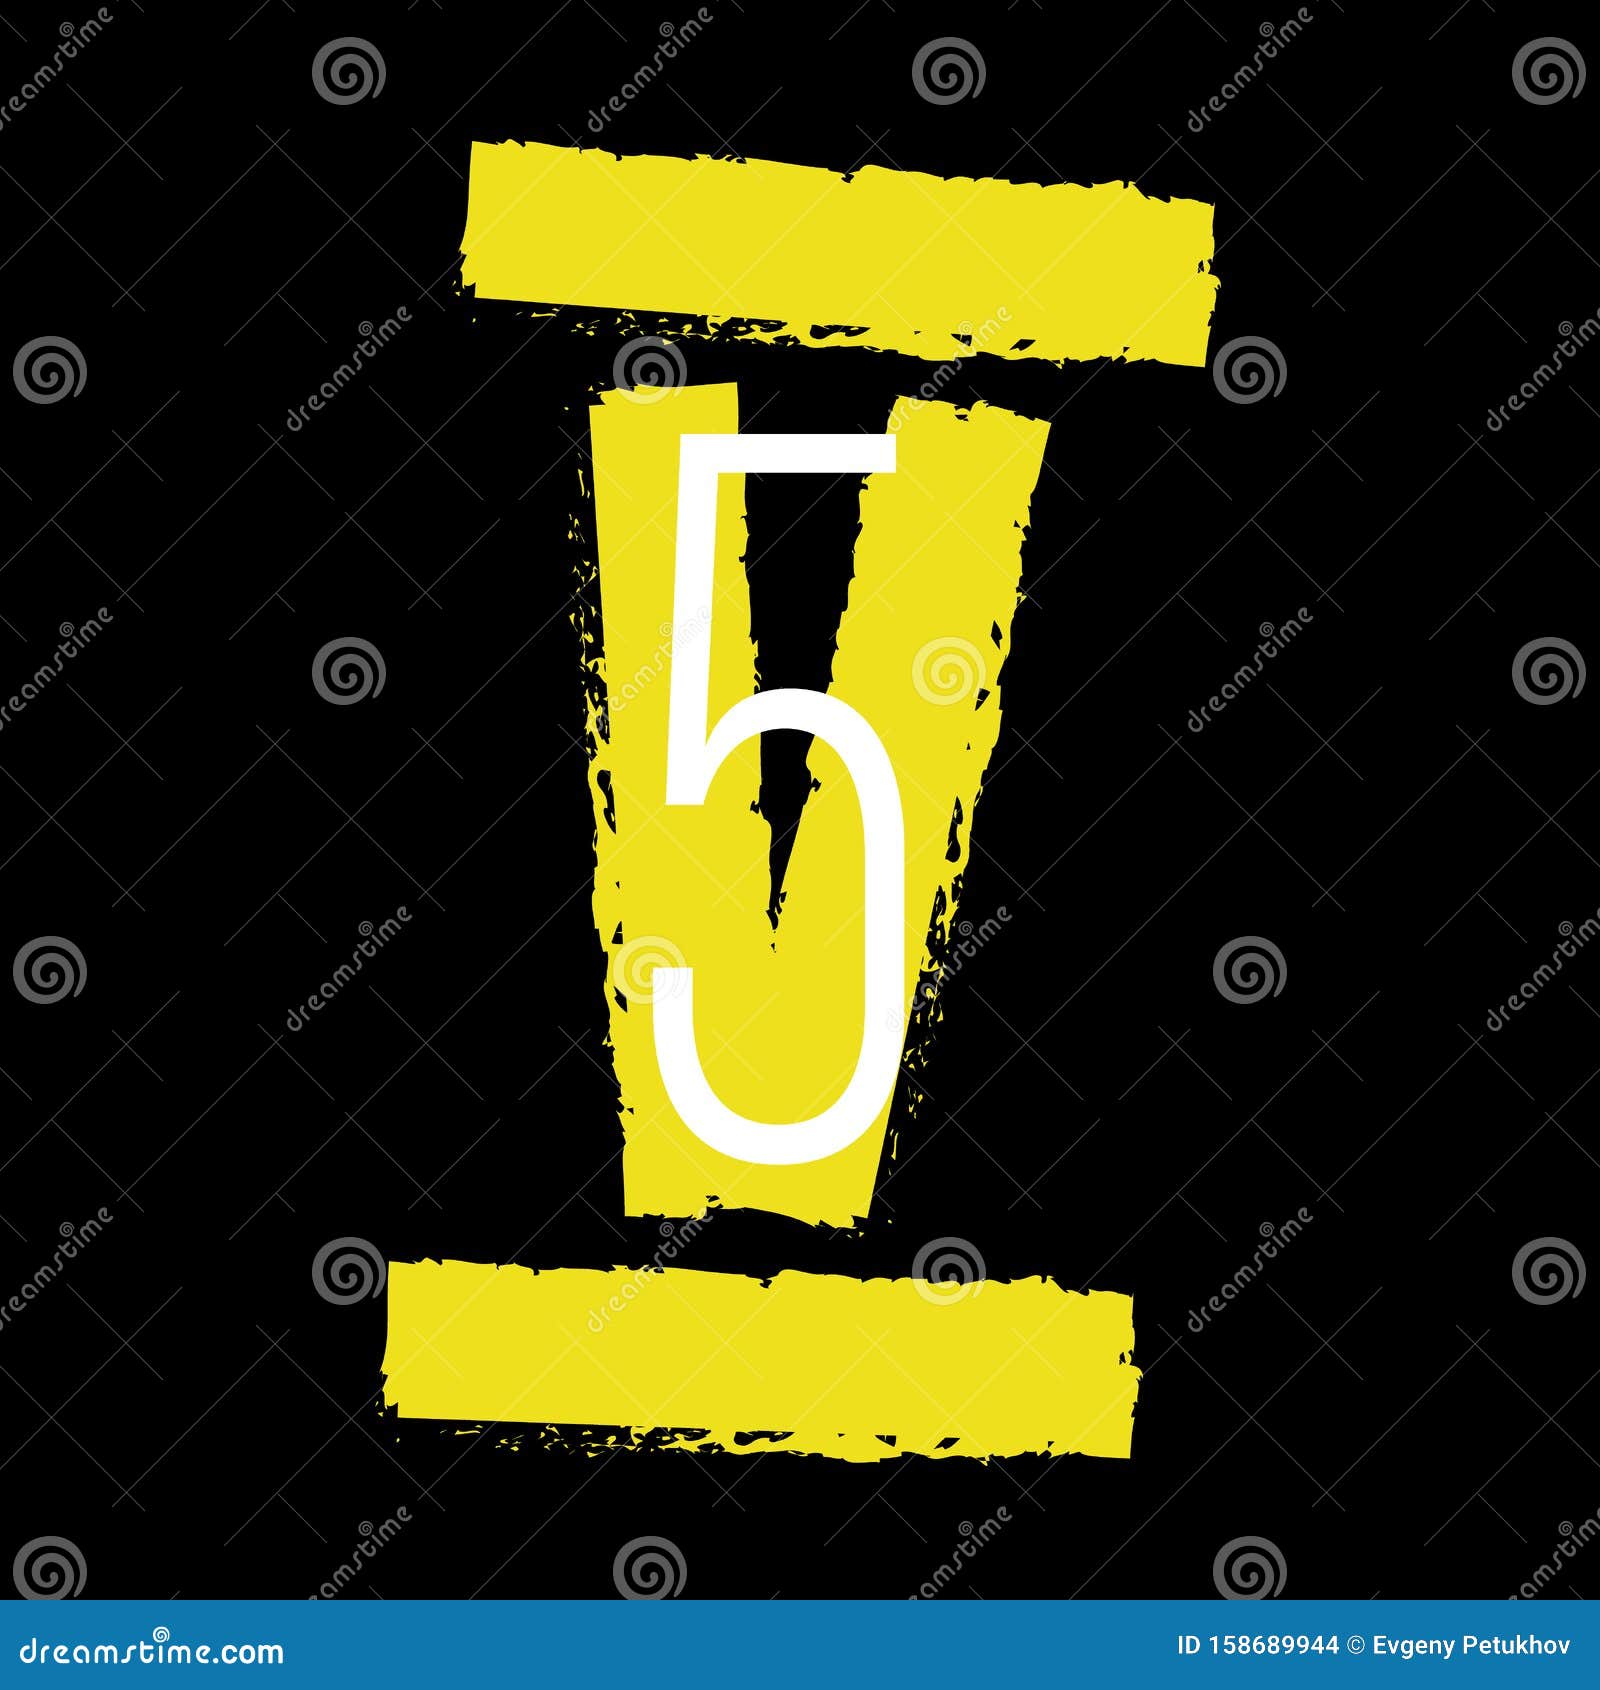 yellow roman numeral 5 on black background. old roman antique alphabet number and font roman alphabet. 